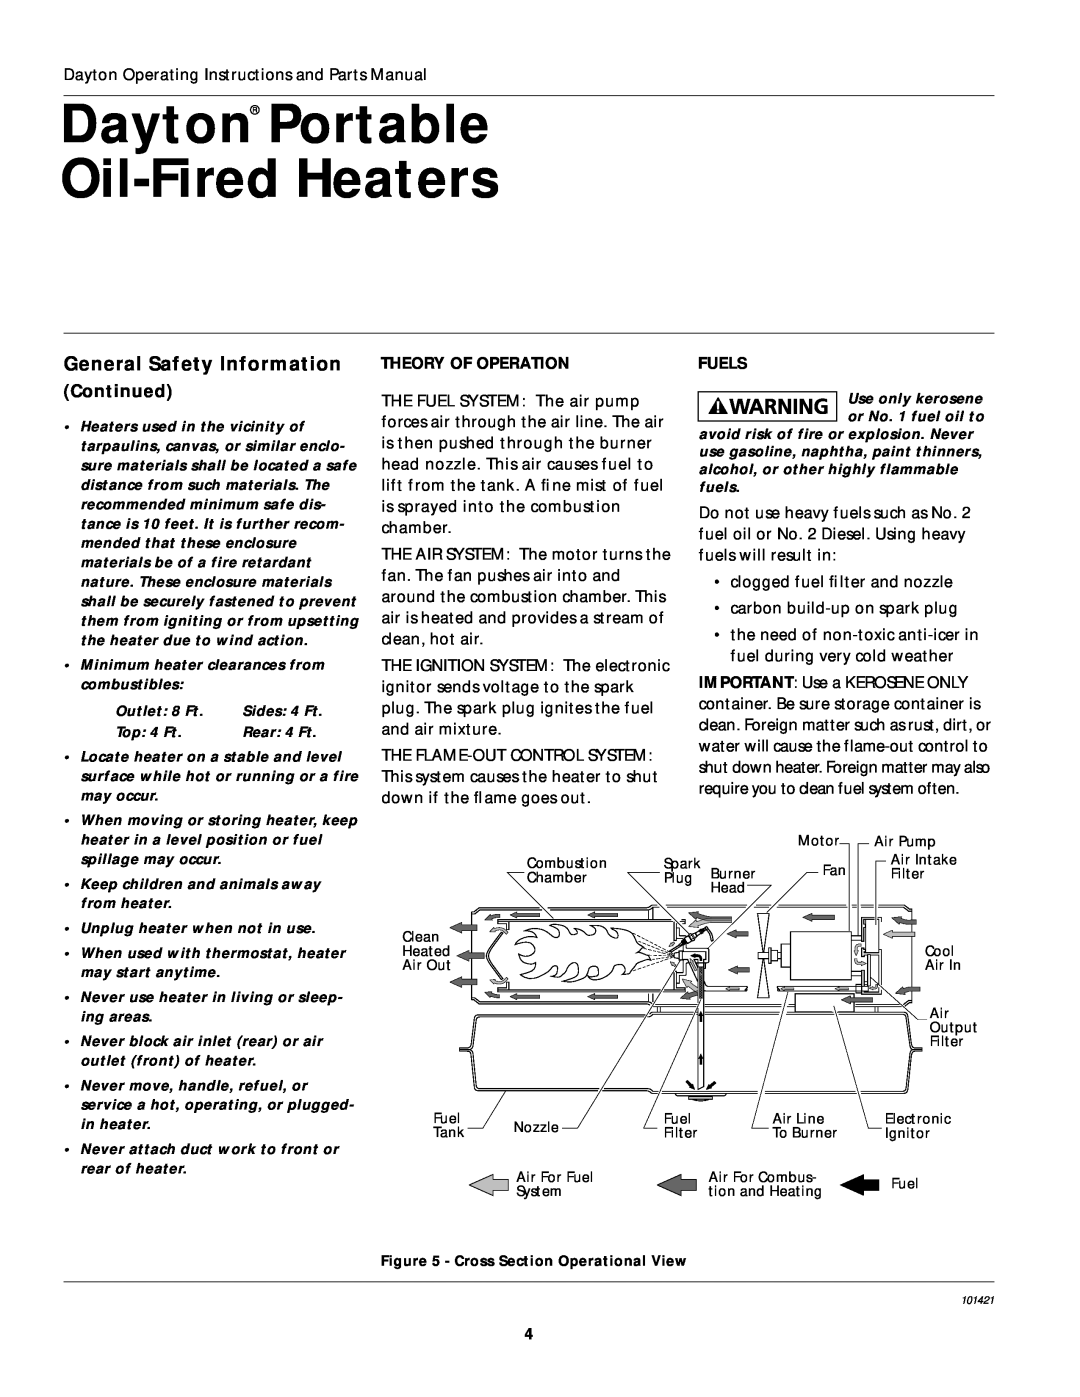 Dayton 2E511D, 3E219C Dayton Portable Oil-FiredHeaters, General Safety Information, Continued, Theory Of Operation, Fuels 